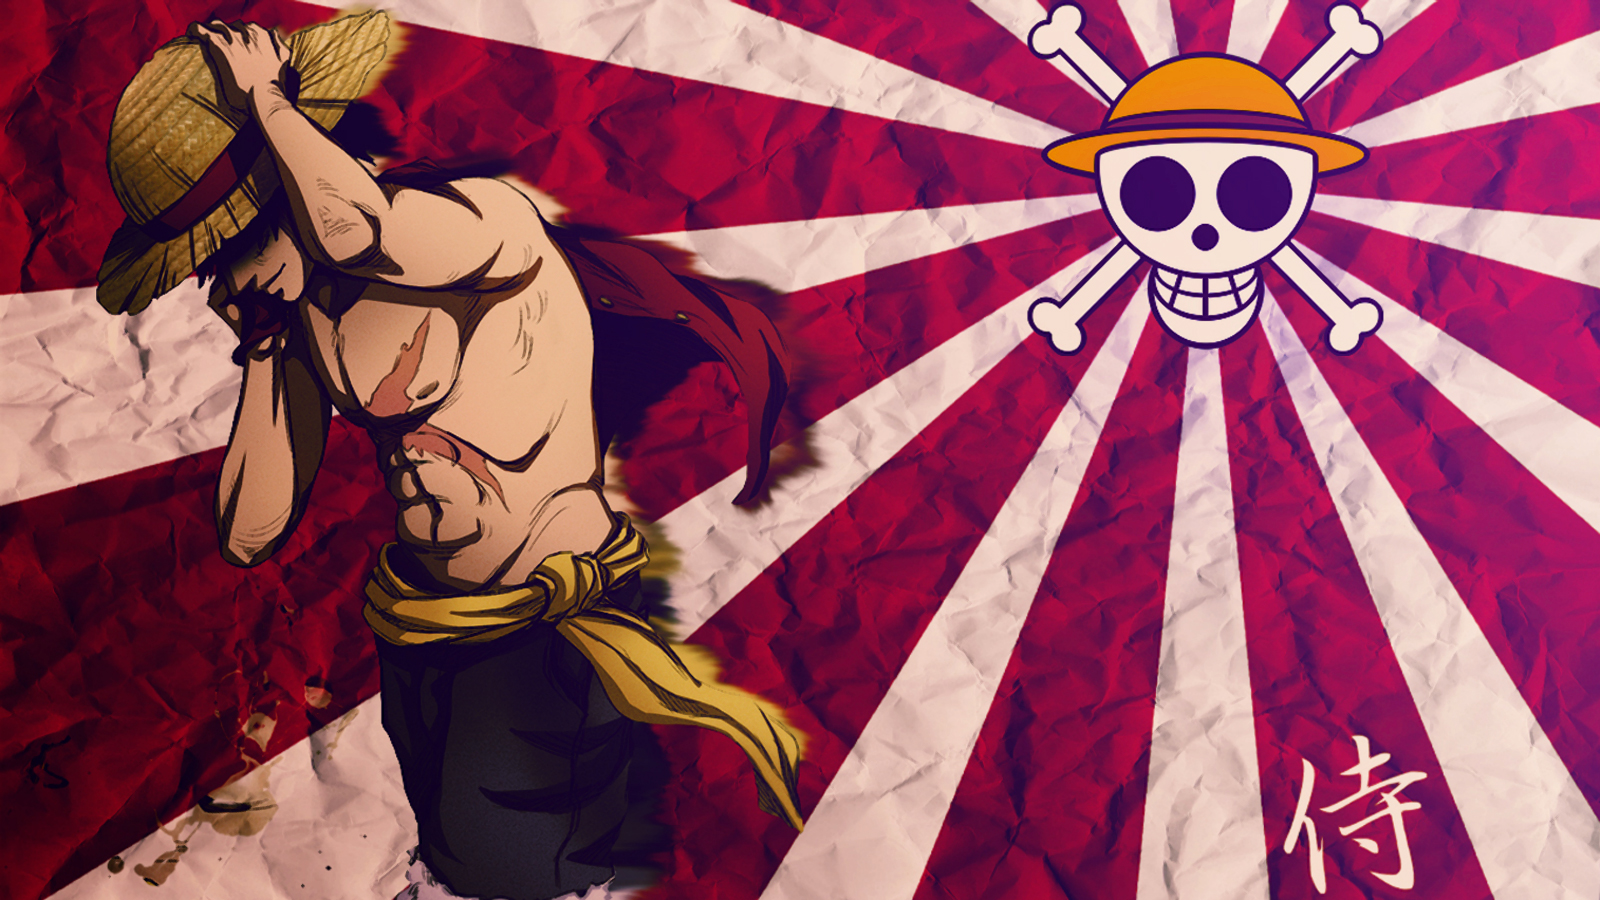 Luffy by JOKAXD - Image Abyss